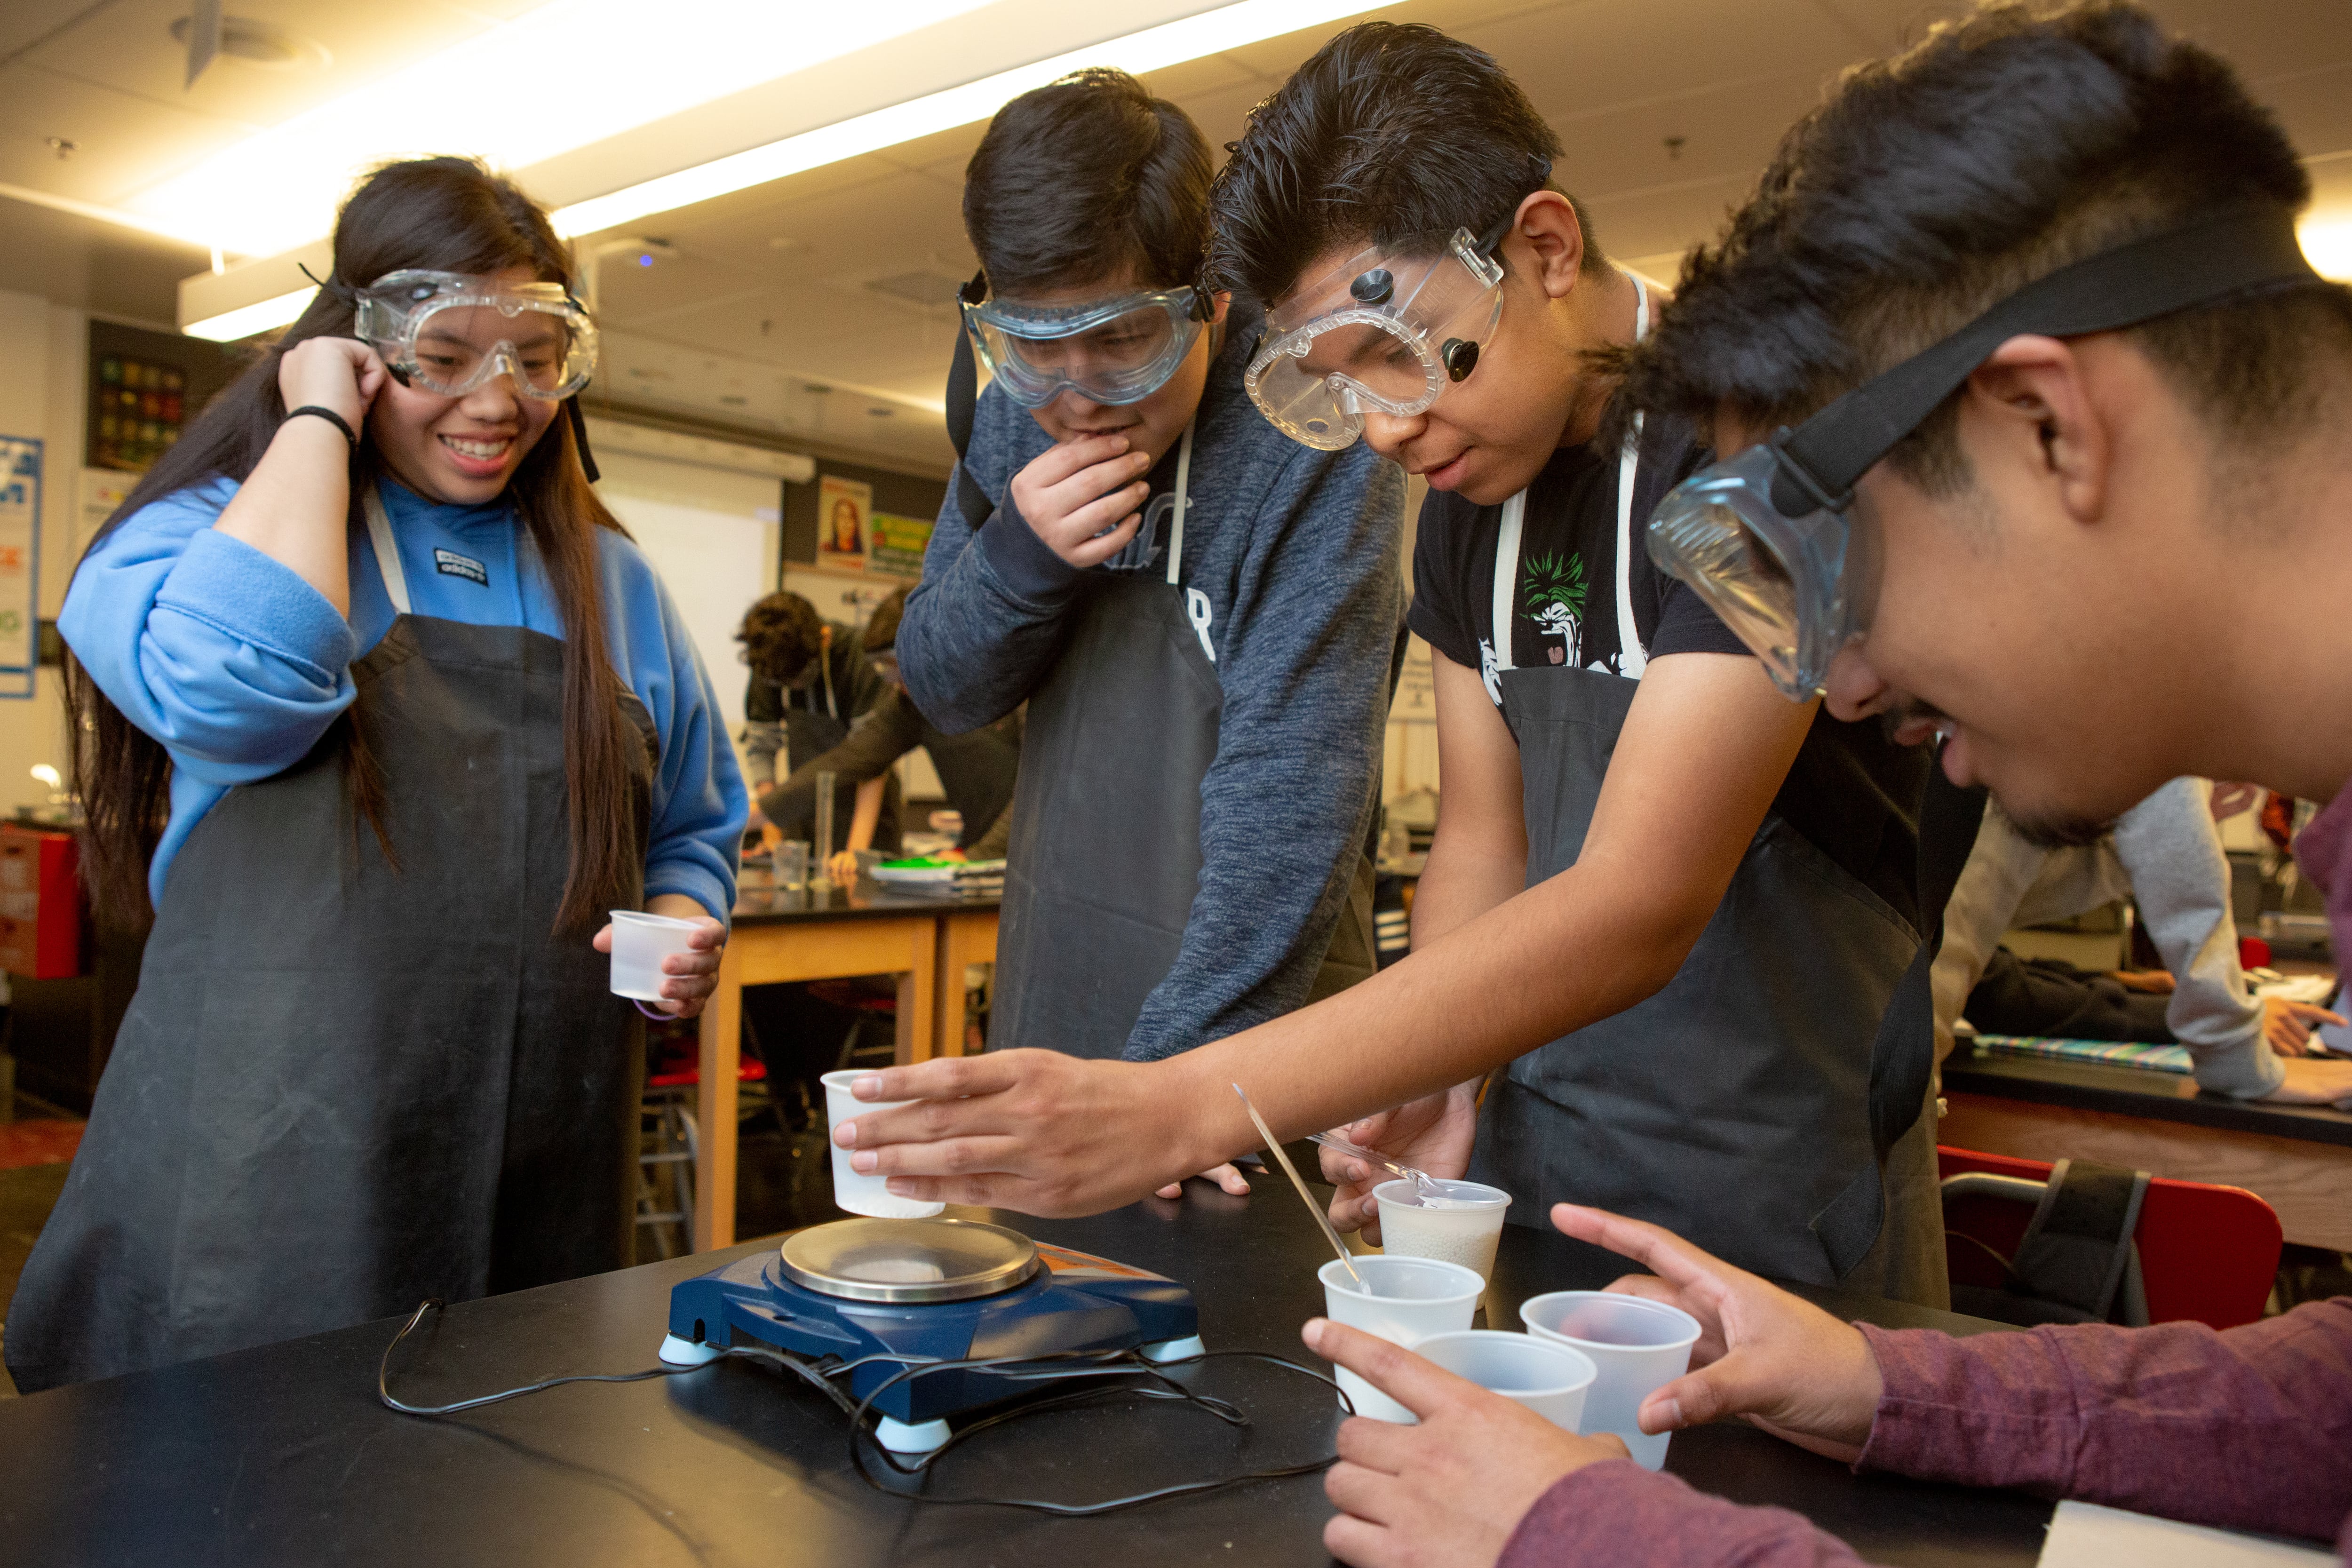 Four high school students wearing protective lab equipment work together on an experiment.